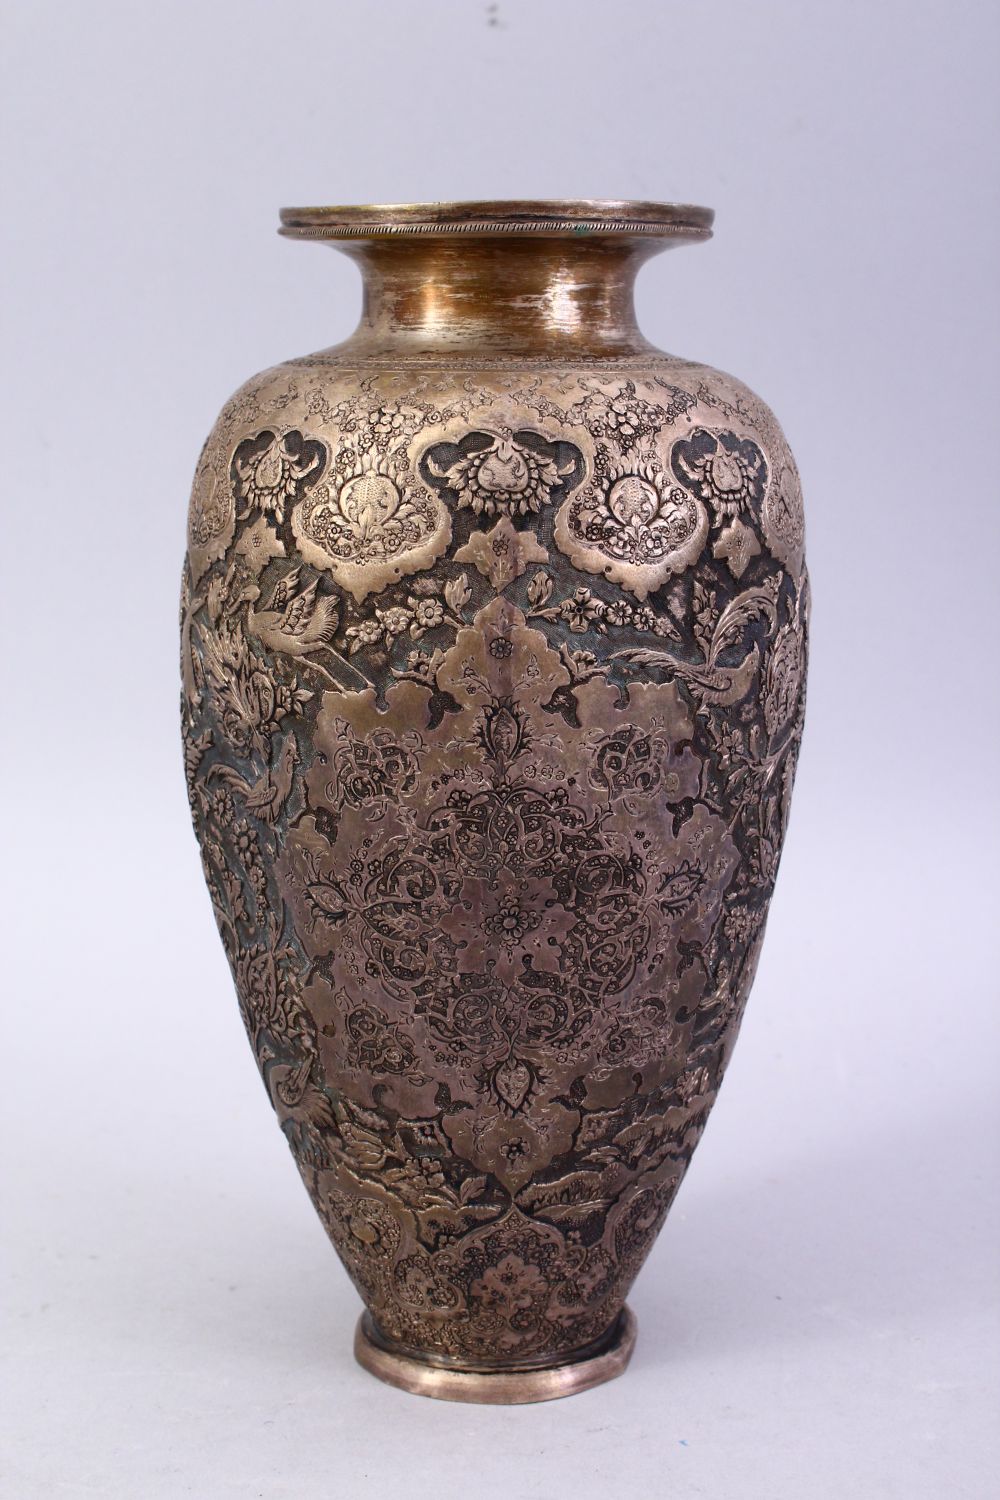 A 18TH / 19TH CENTURY IRANIAN CARVED SILVER VASE, with a multitude of decoration depicting flora and - Image 3 of 12